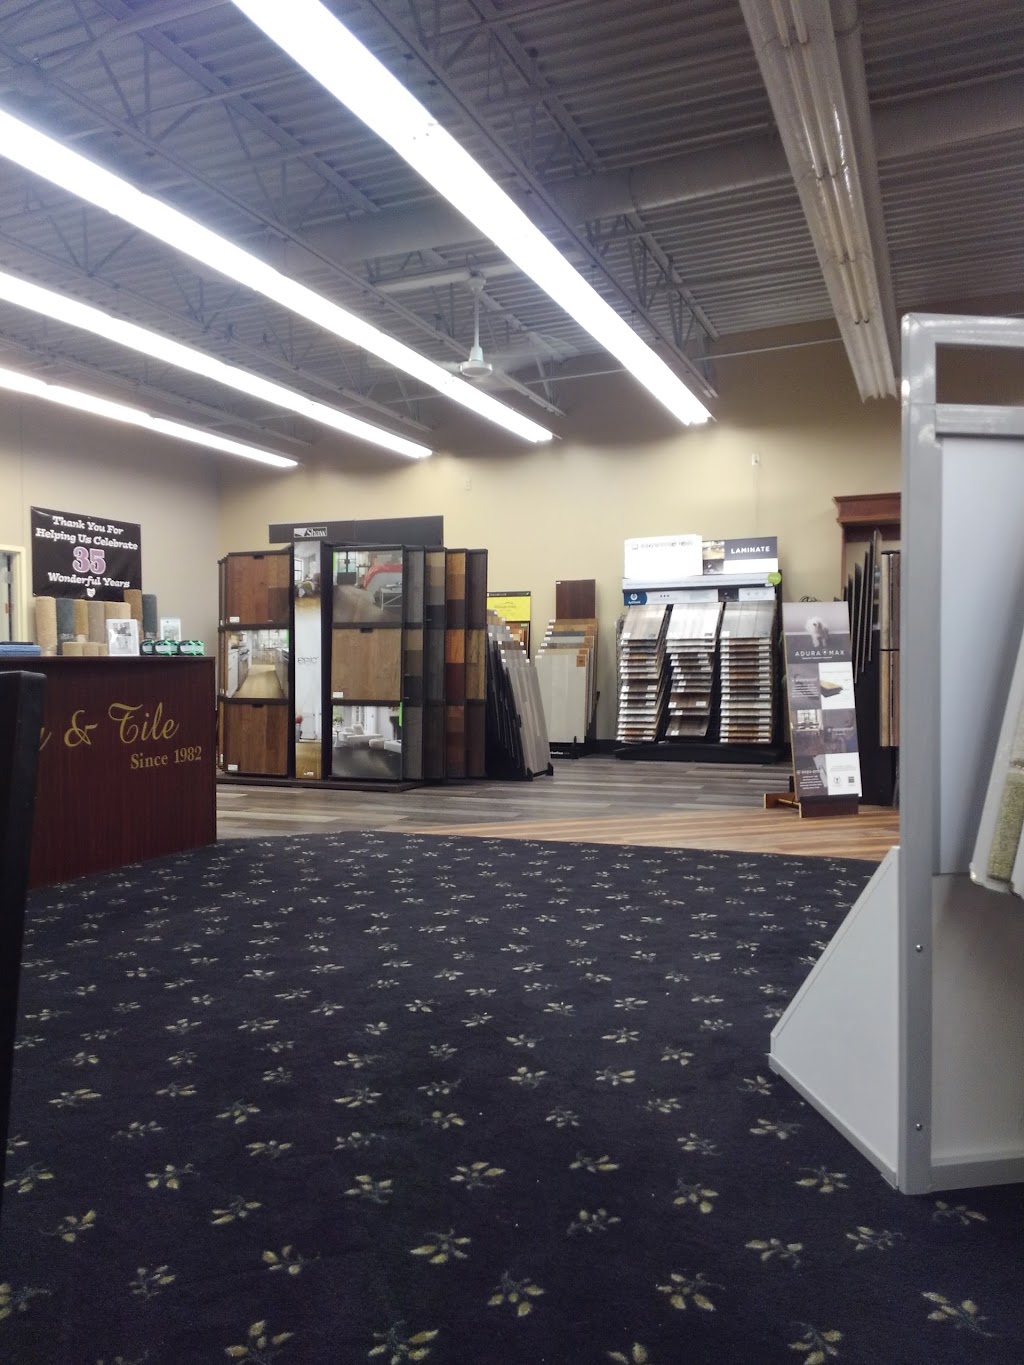 Carpet Company & Tile | 8025 Mayfield Rd, Chesterland, OH 44026, USA | Phone: (440) 729-1010